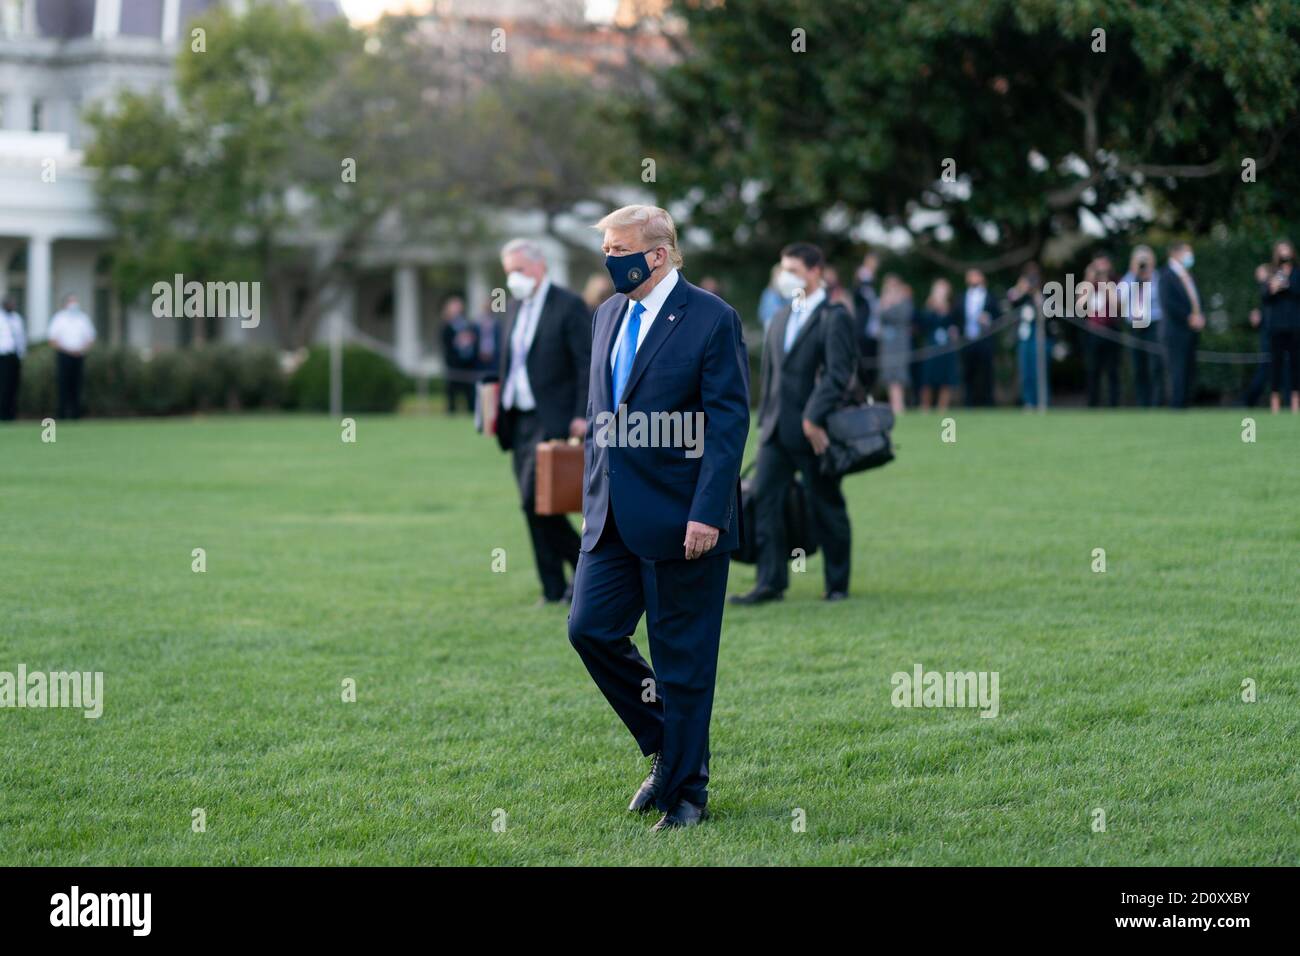 Washington, United States Of America. 02nd Oct, 2020. President Donald J. Trump walks across the South Lawn of the White House before boarding Marine One Friday, Oct. 2, 2020, en route to Walter Reed National Military Medical Center in Bethesda, Md People: President Donald Trump Credit: Storms Media Group/Alamy Live News Stock Photo